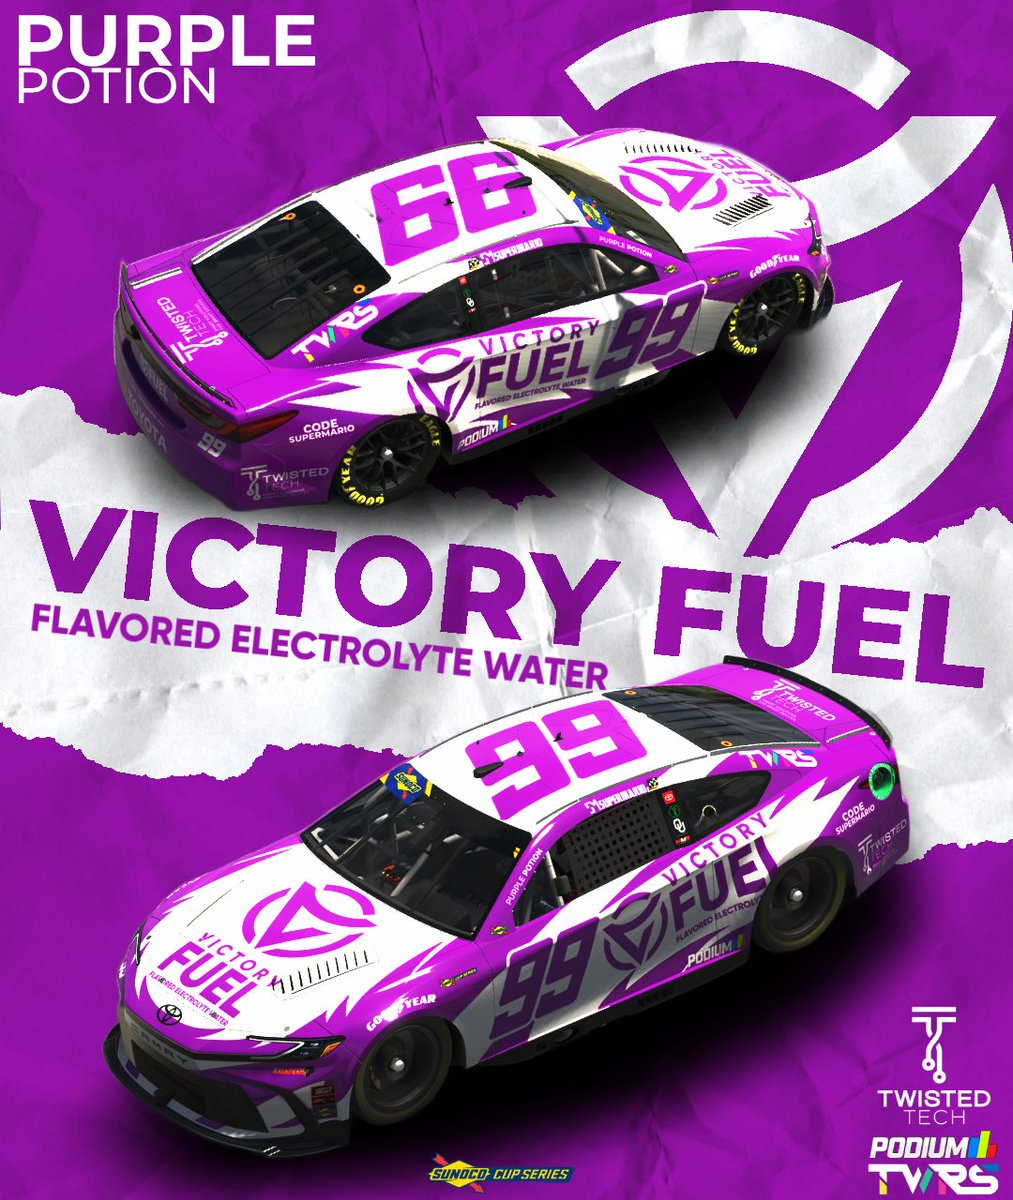 RACEDAY Just got out of a 24 hour race but now we're back in the states for the @sunococupseries Allstar Race! With this, decided to debut a new @Drink_Victory scheme with Purple Potion! Tune in on KBueno Racing Network!!! @TwistedTechIT @PodiumeSports @TeamWatsonRacin